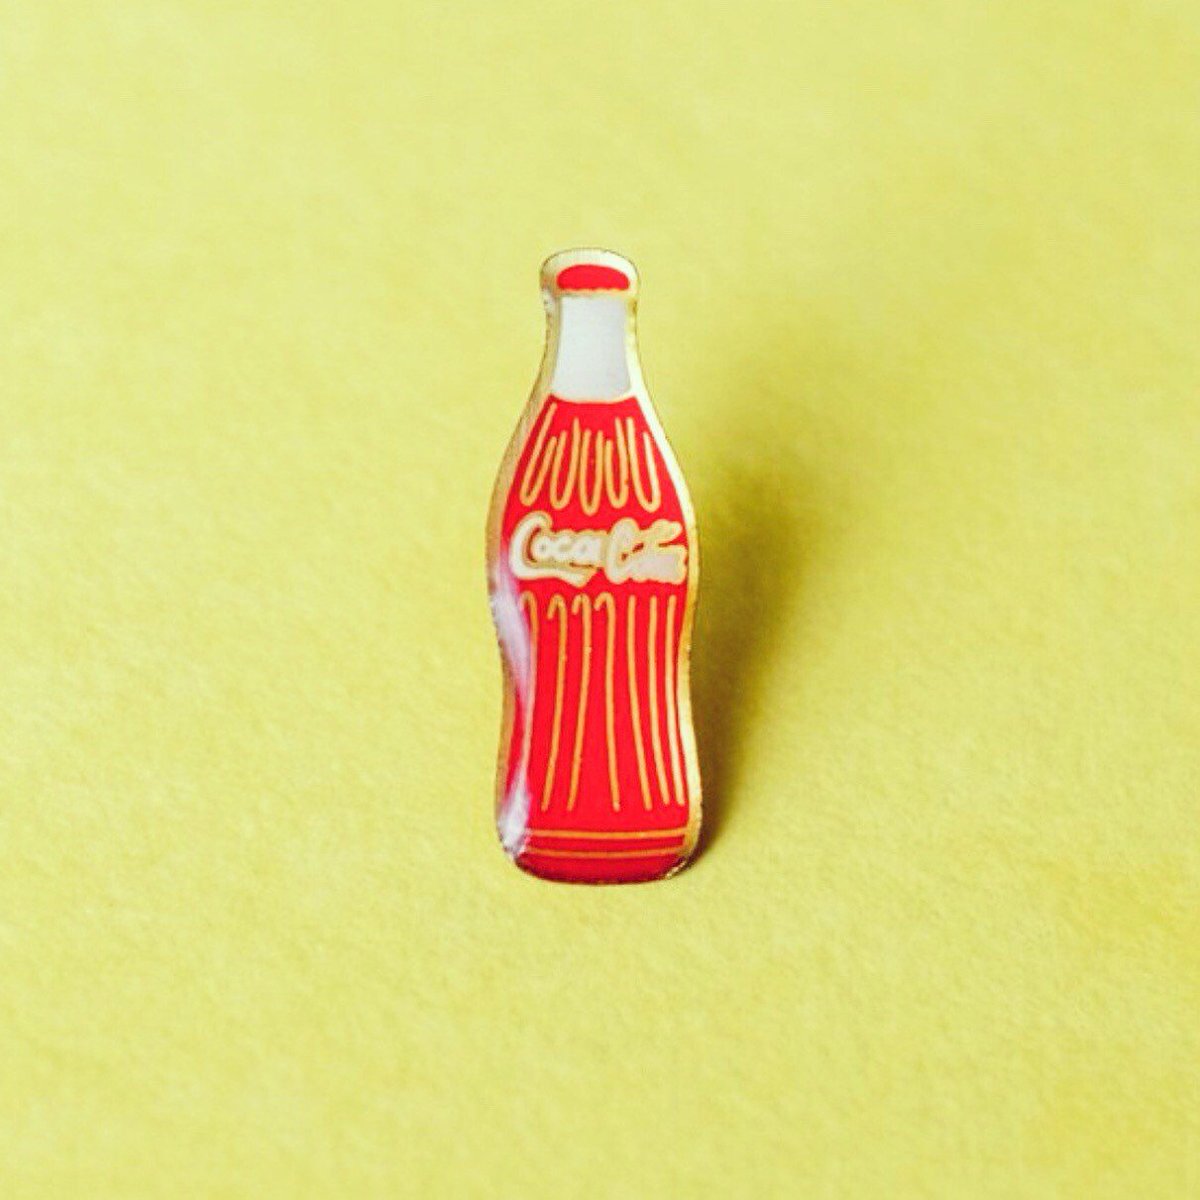 FOR SALE - Coca Cola Pin Badge, Vintage 1980s enamel lapel pin of the iconic red and gold Coke Bottle Design etsy.me/2Q21xVz #accessories #pin #red #gold #cokelapelpin #kitschgift #giftunder5 #tietack #cocacolapins